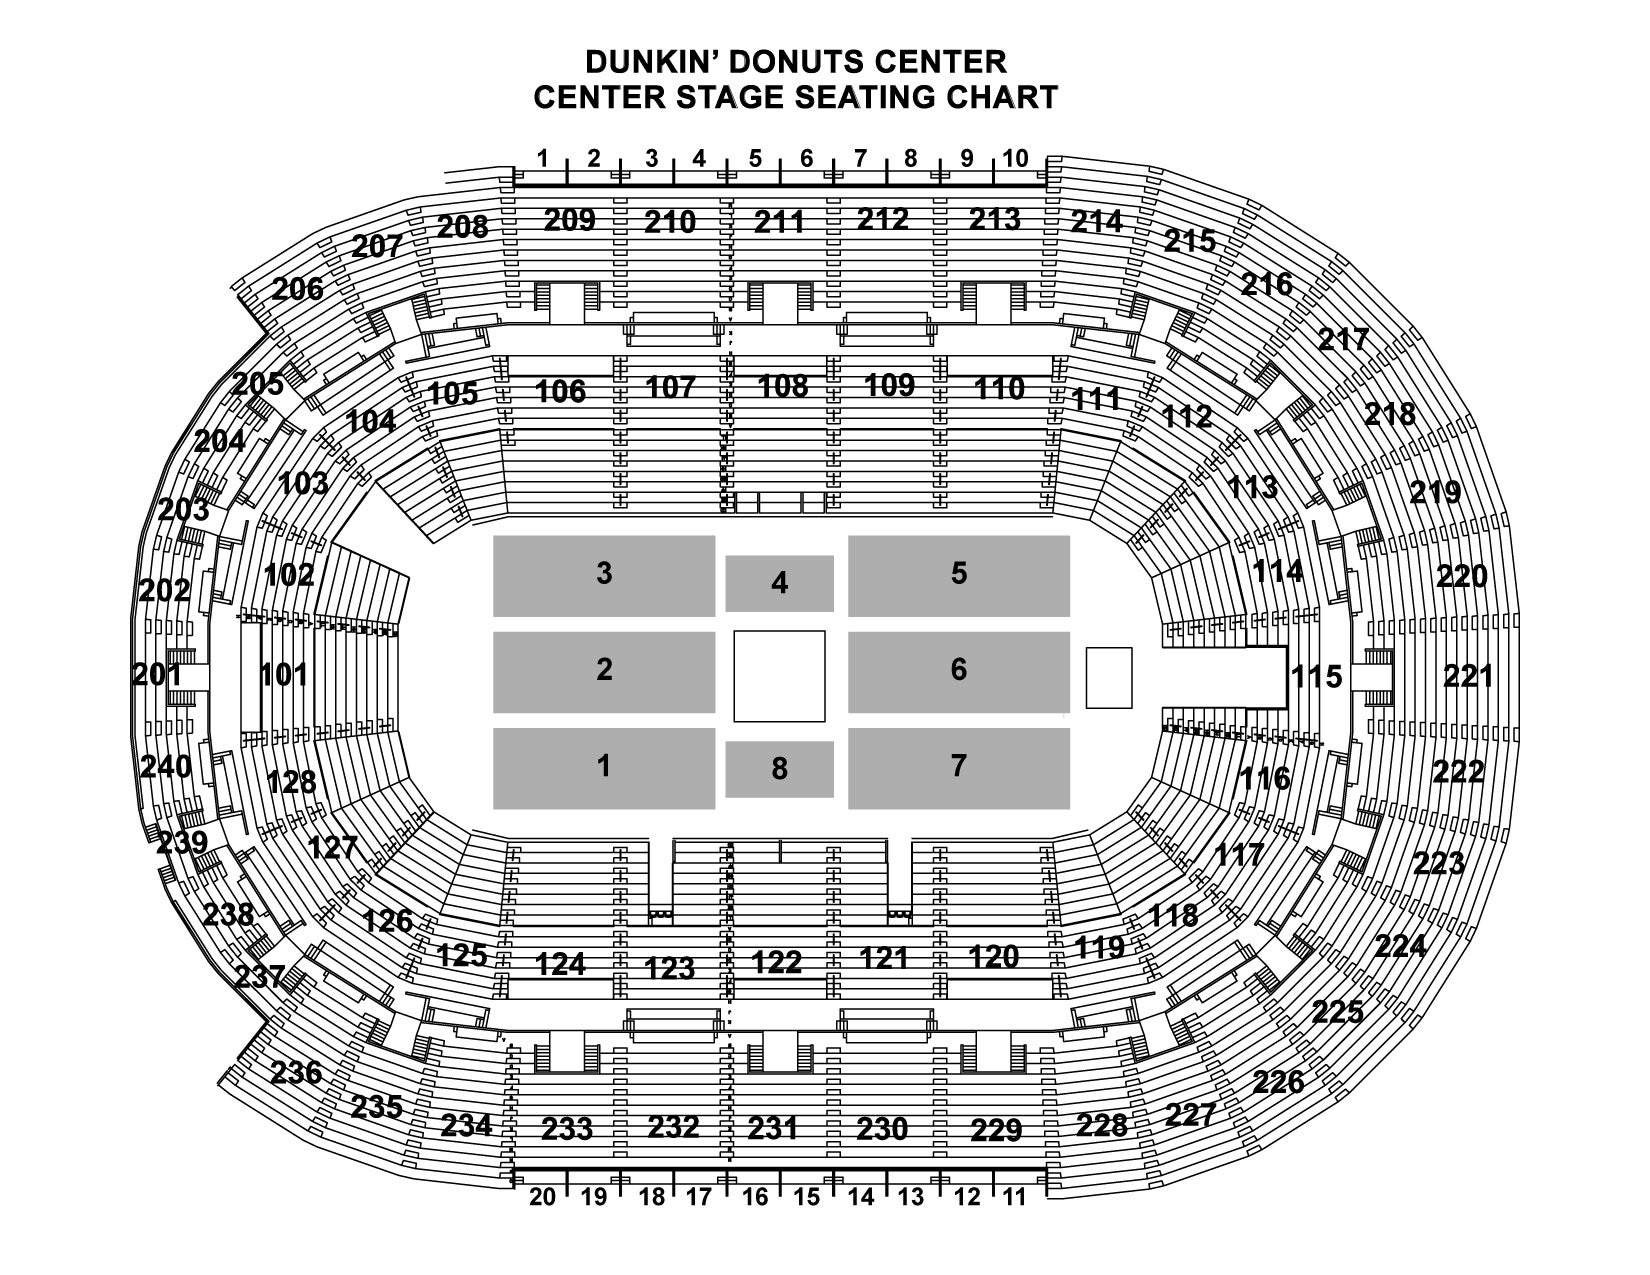 Seating Chart | Dunkin' Donuts Center